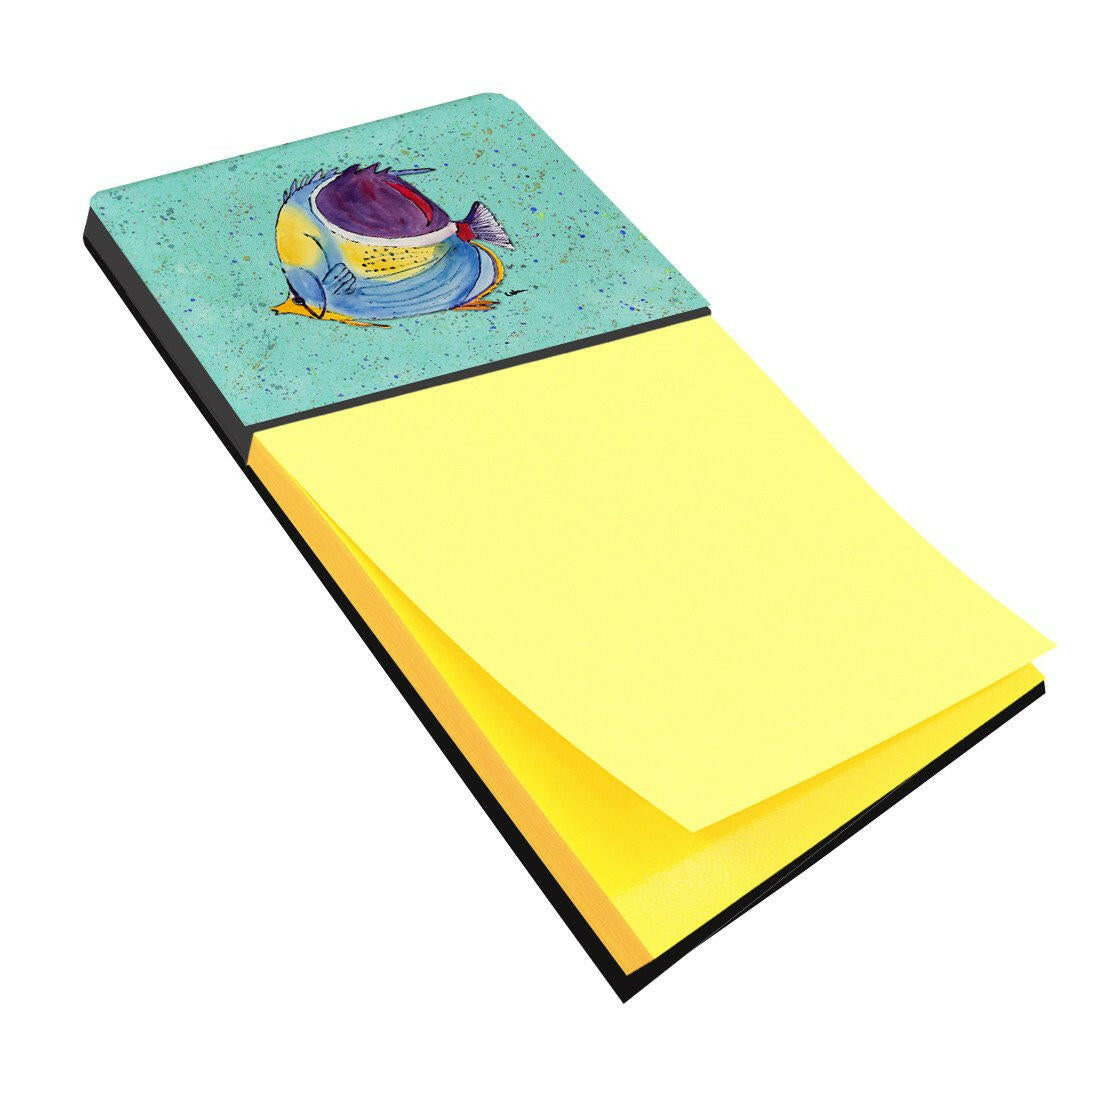 Tropical Fish on Teal Refiillable Sticky Note Holder or Postit Note Dispenser 8576SN by Caroline's Treasures